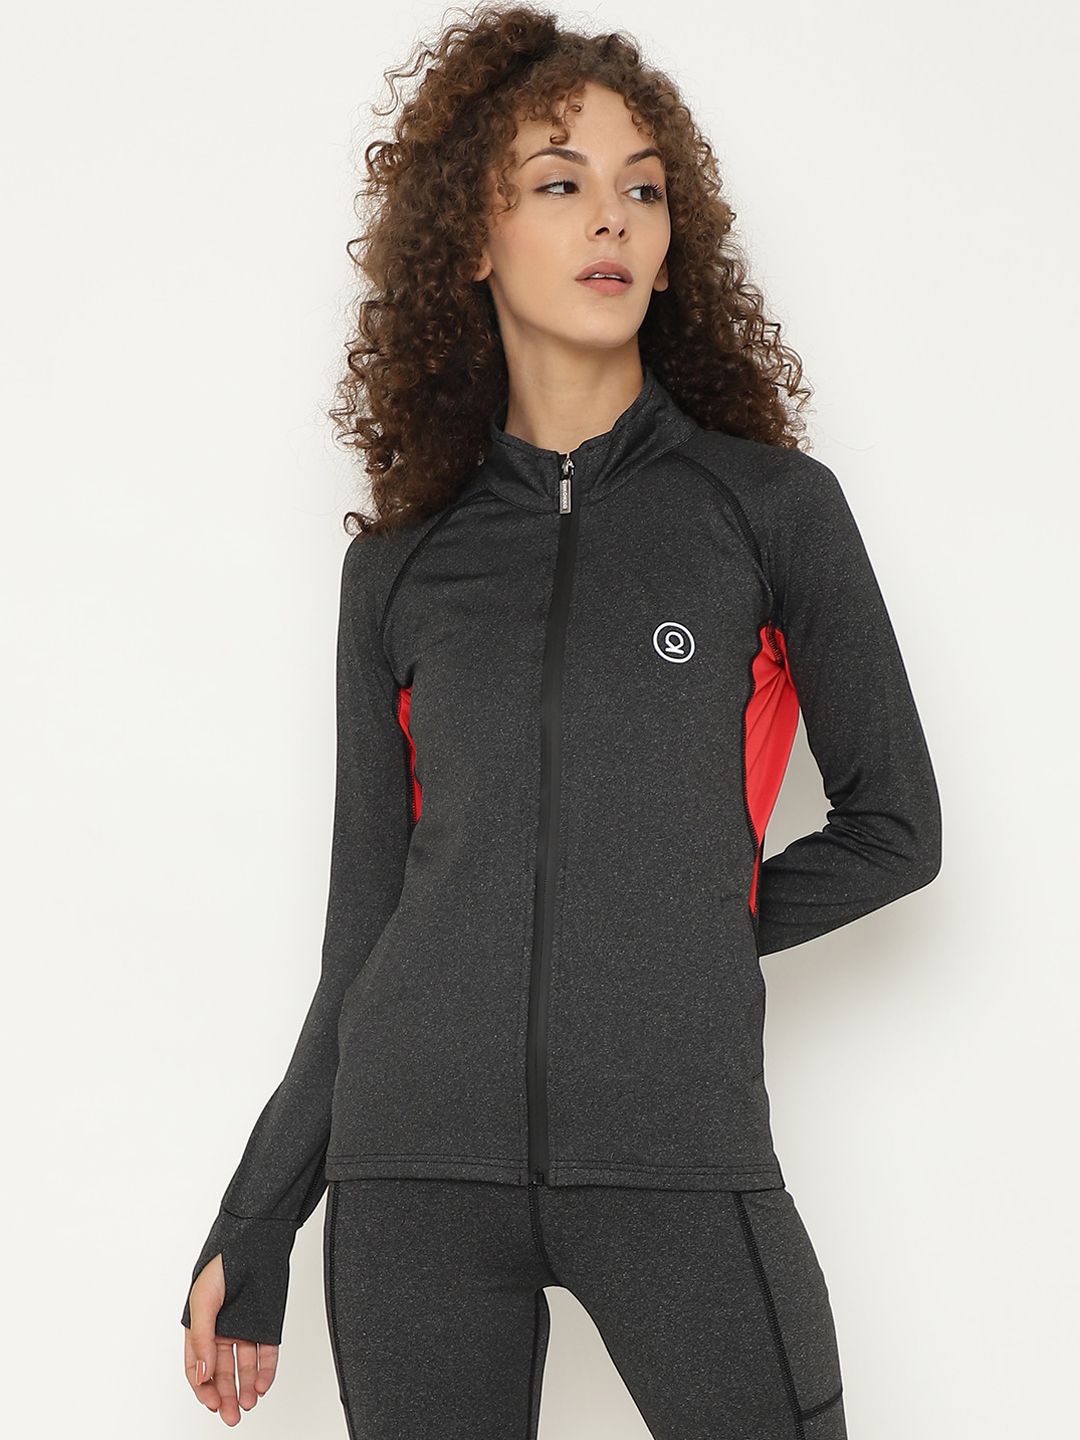 Chkokko Women Grey & Red Sporty Zipper Jacket with Patchwork Price in India